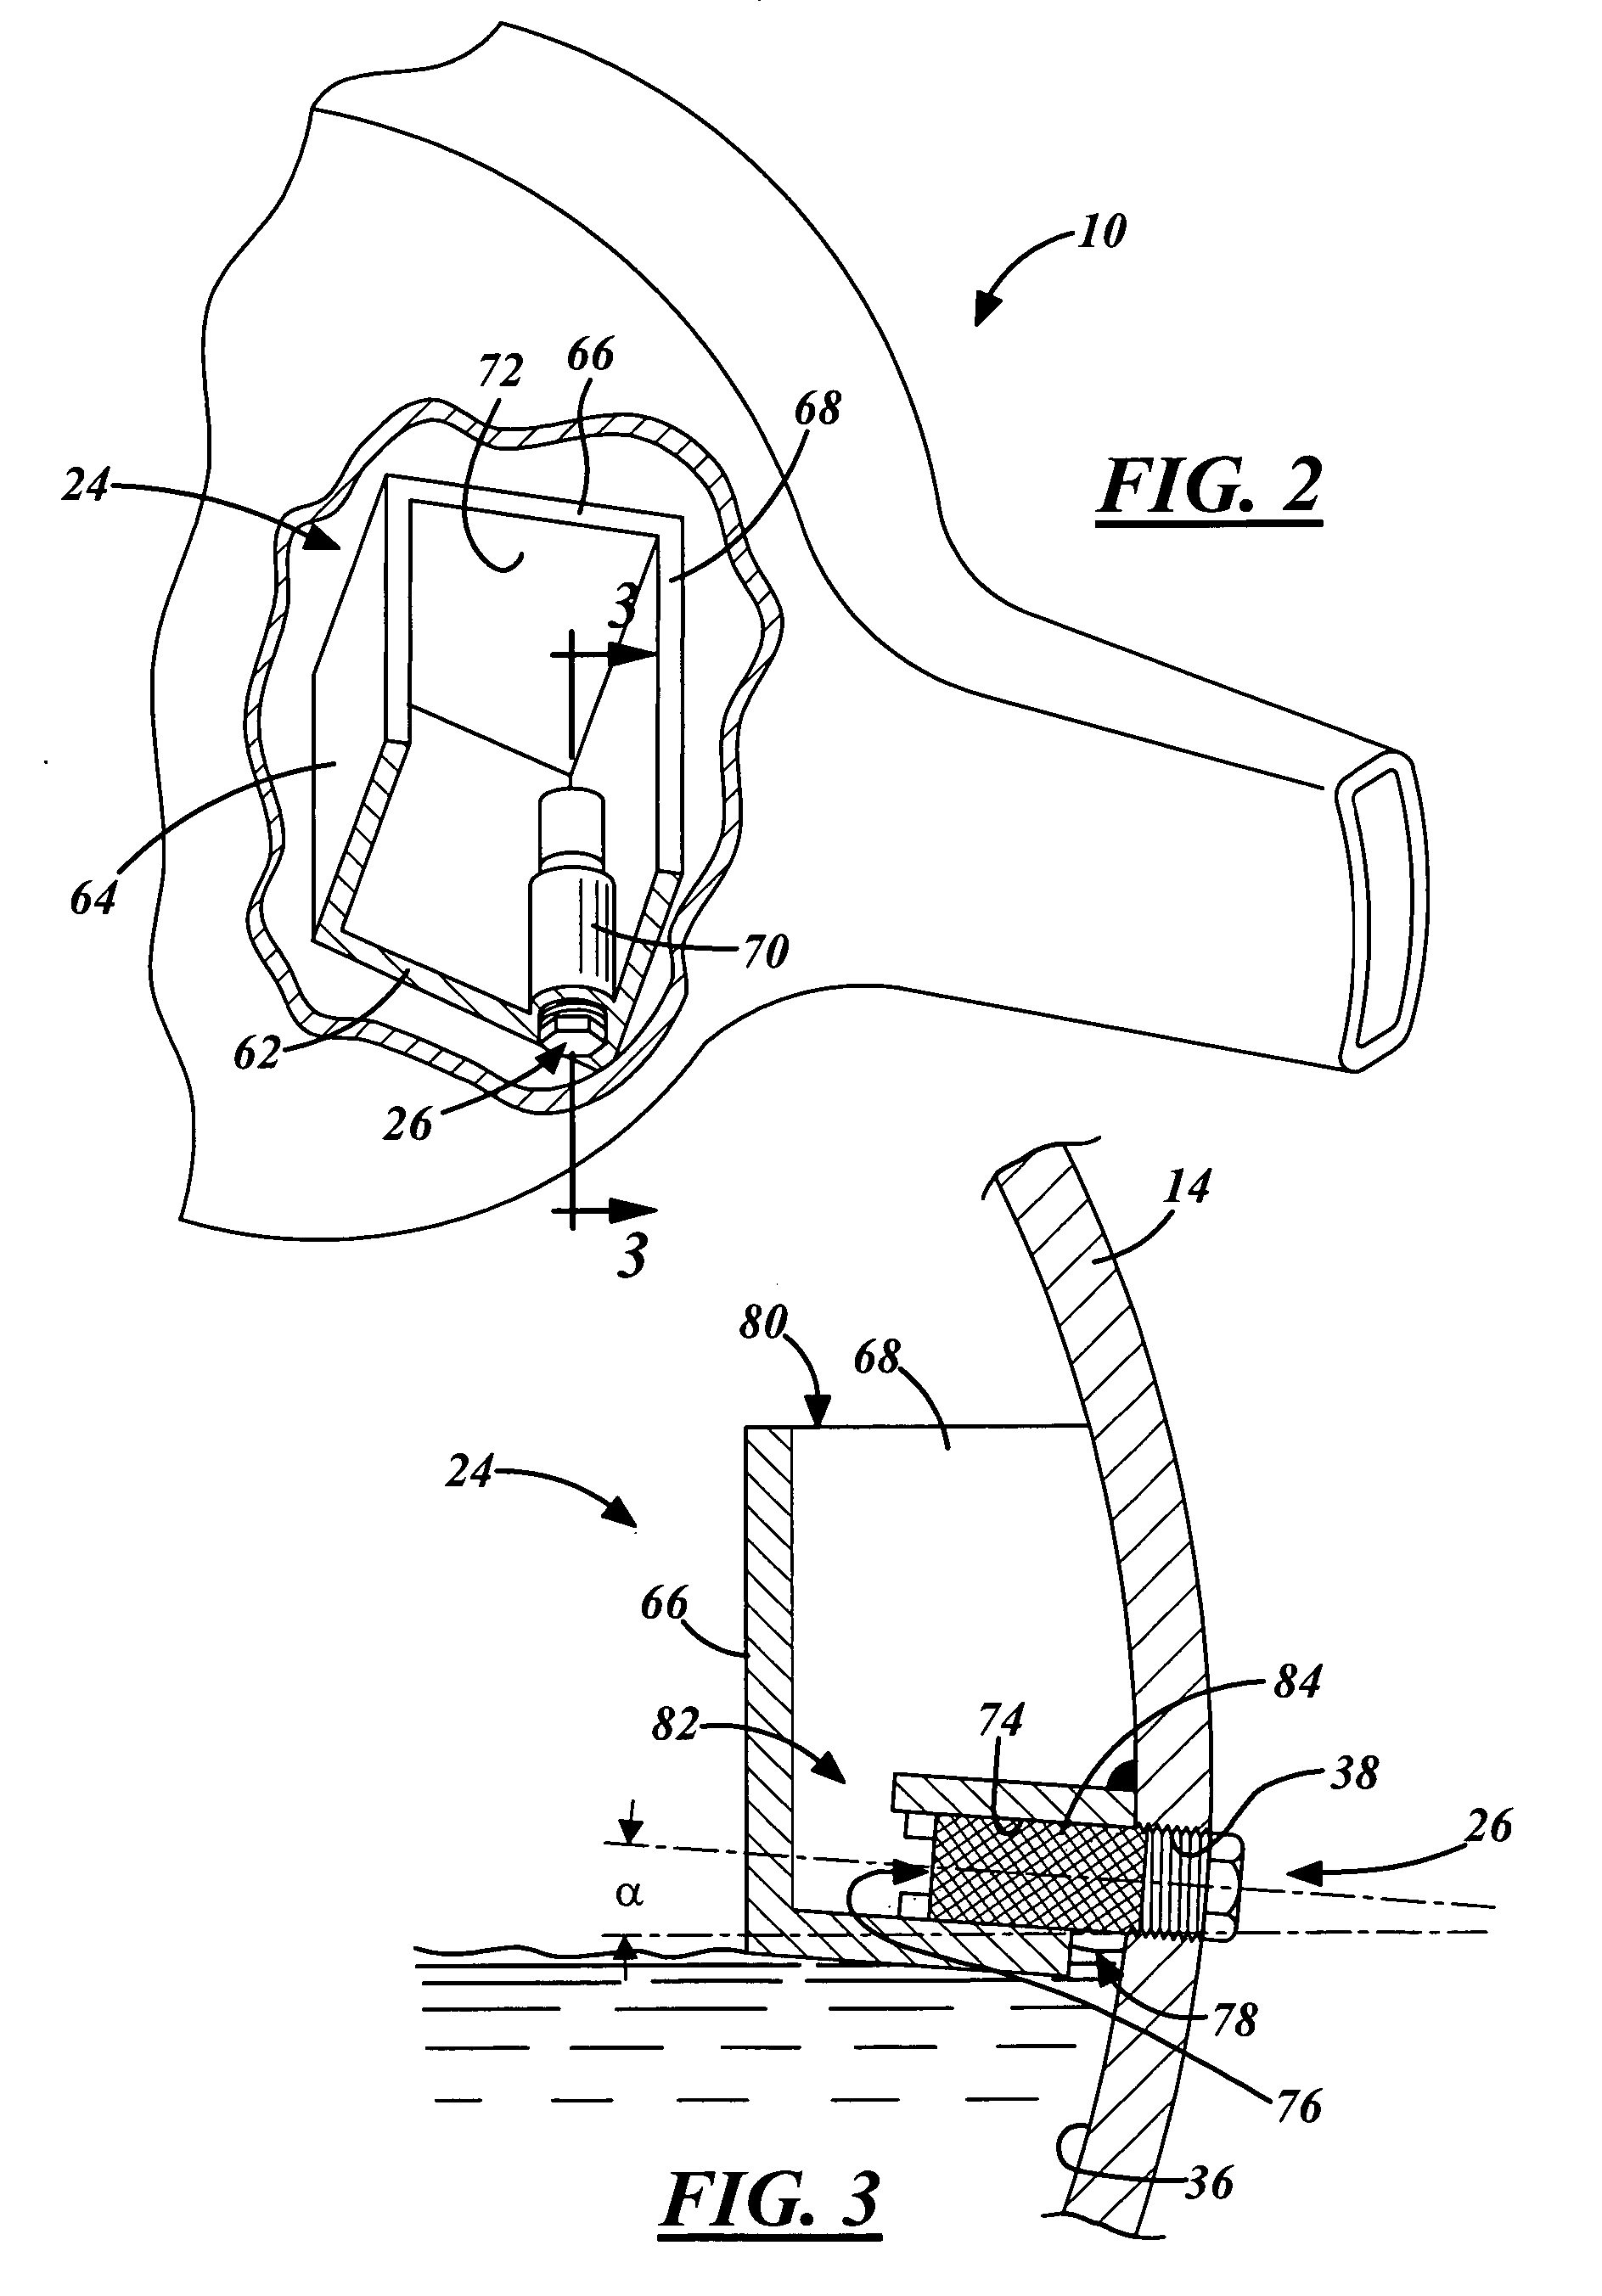 Enhanced lubrication system for drive axle assemblies